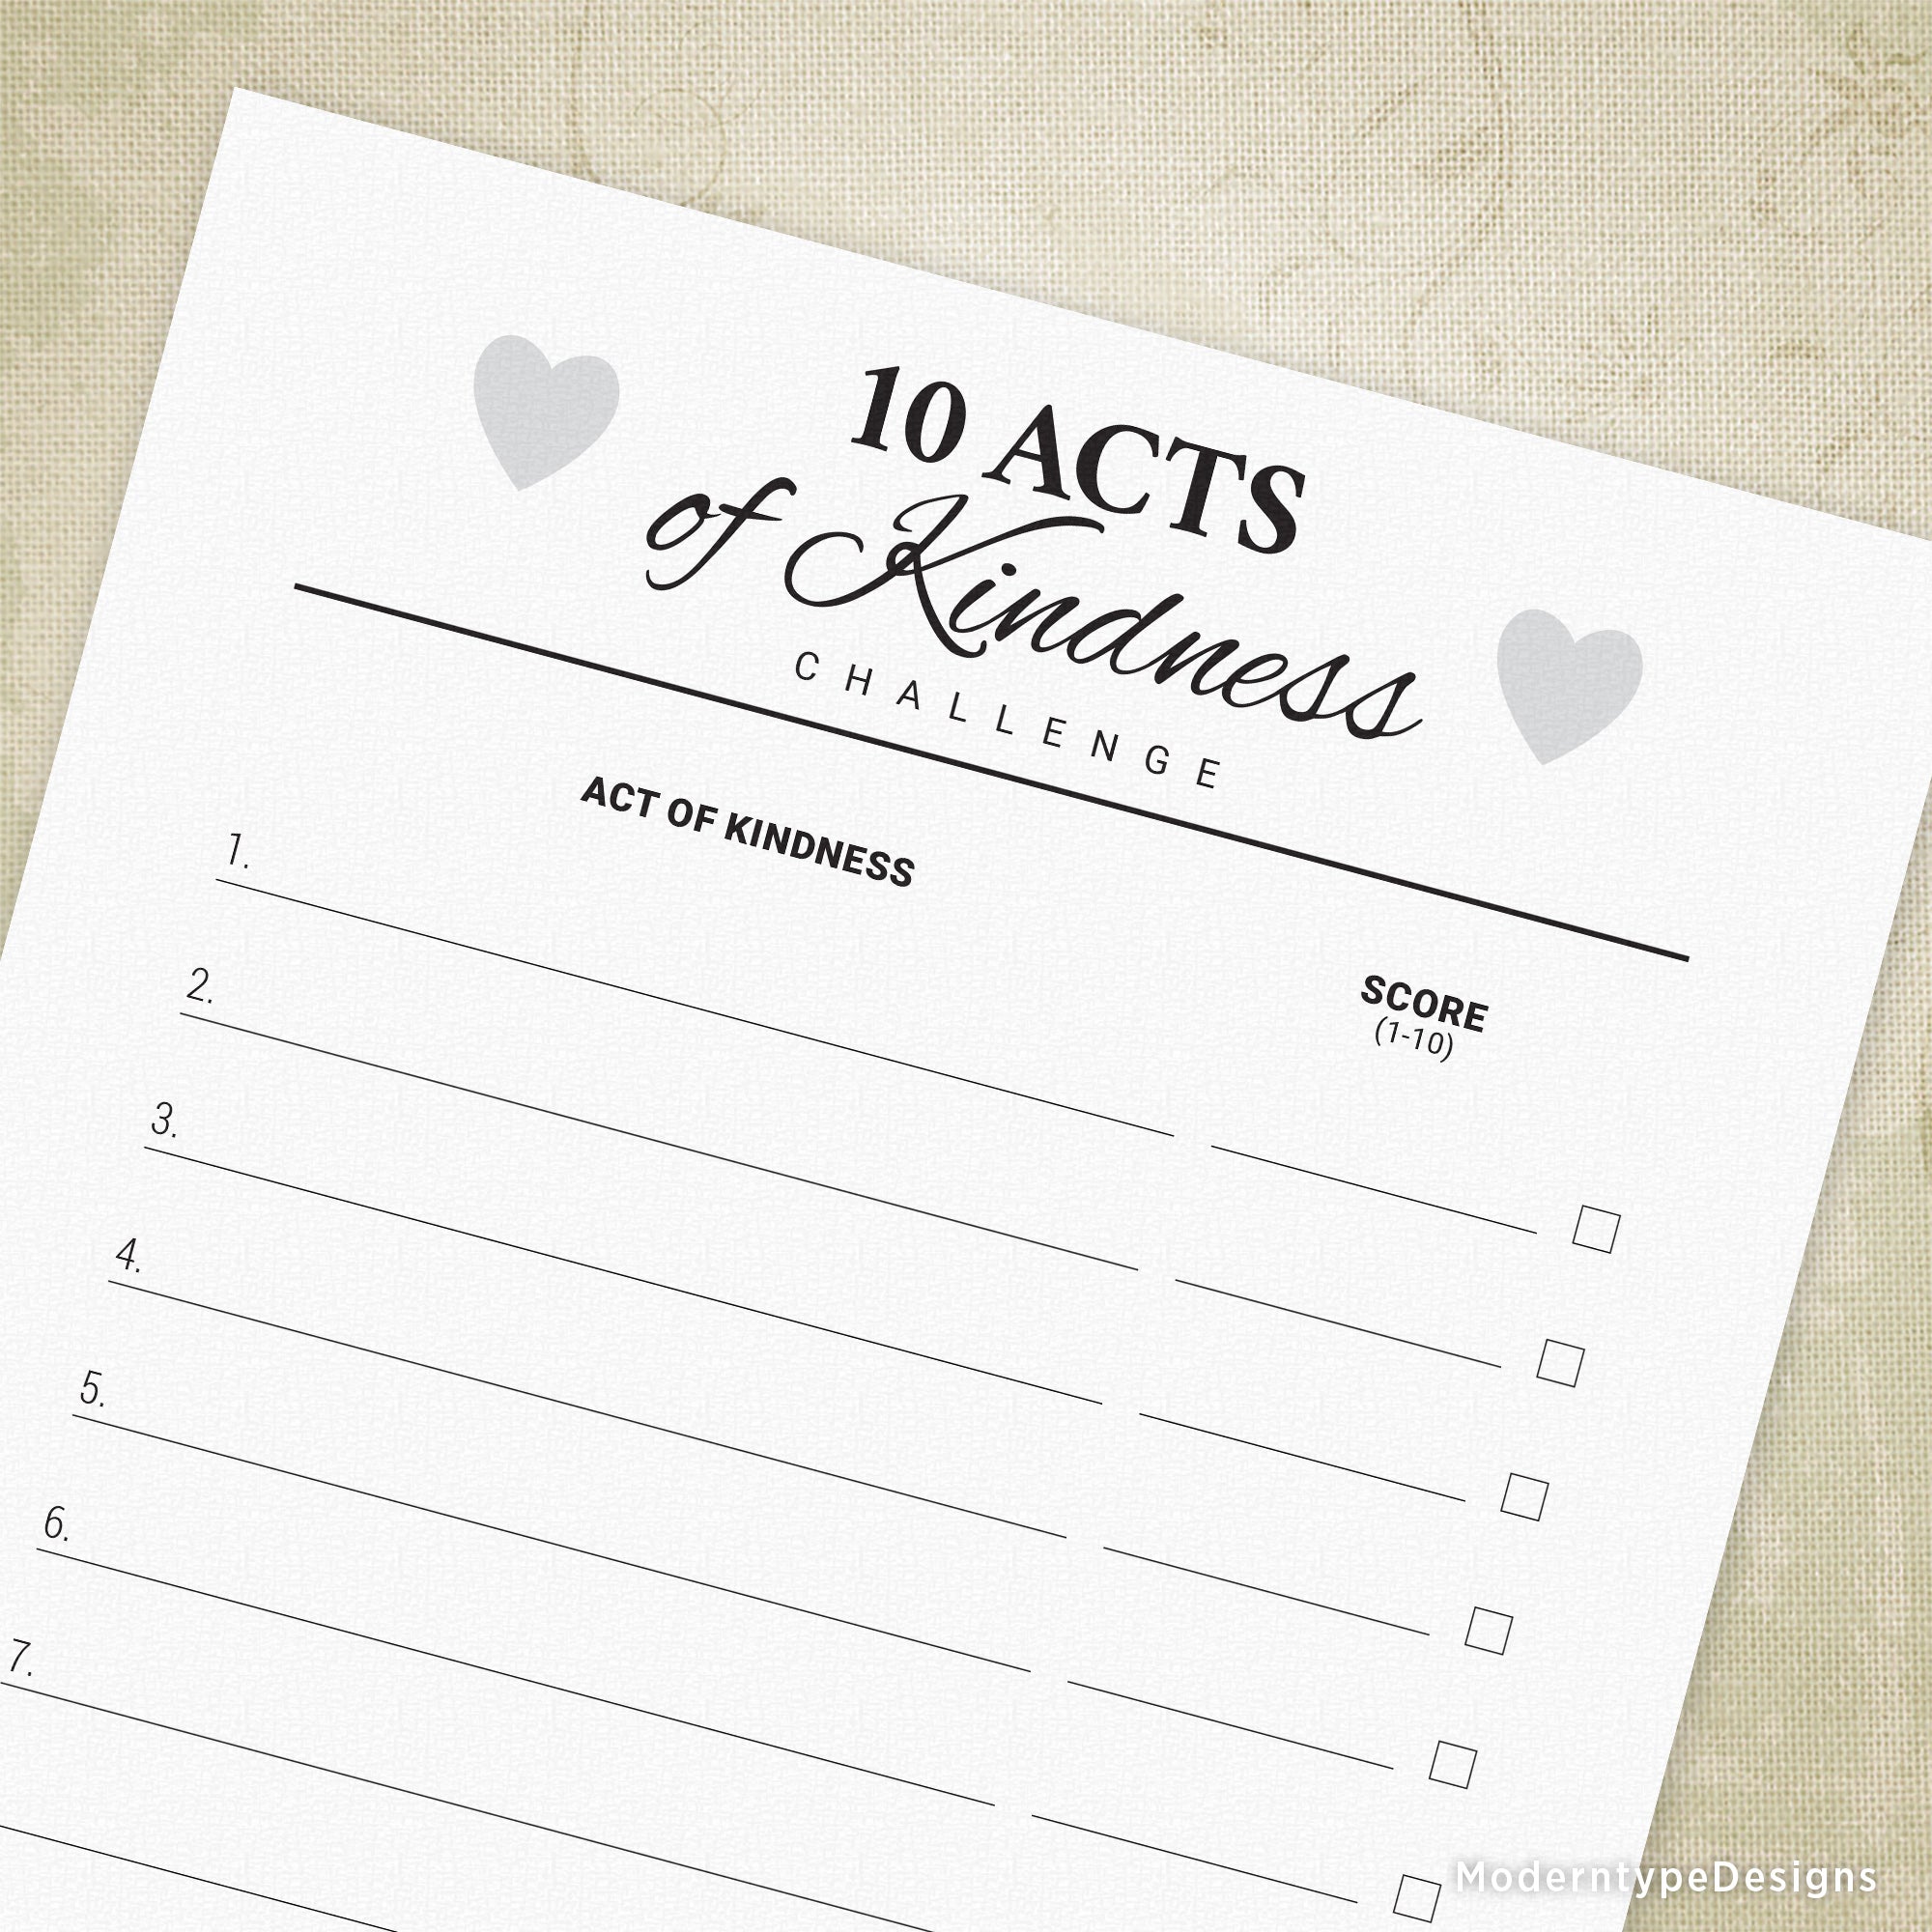 10 Acts of Kindness Challenge Printable